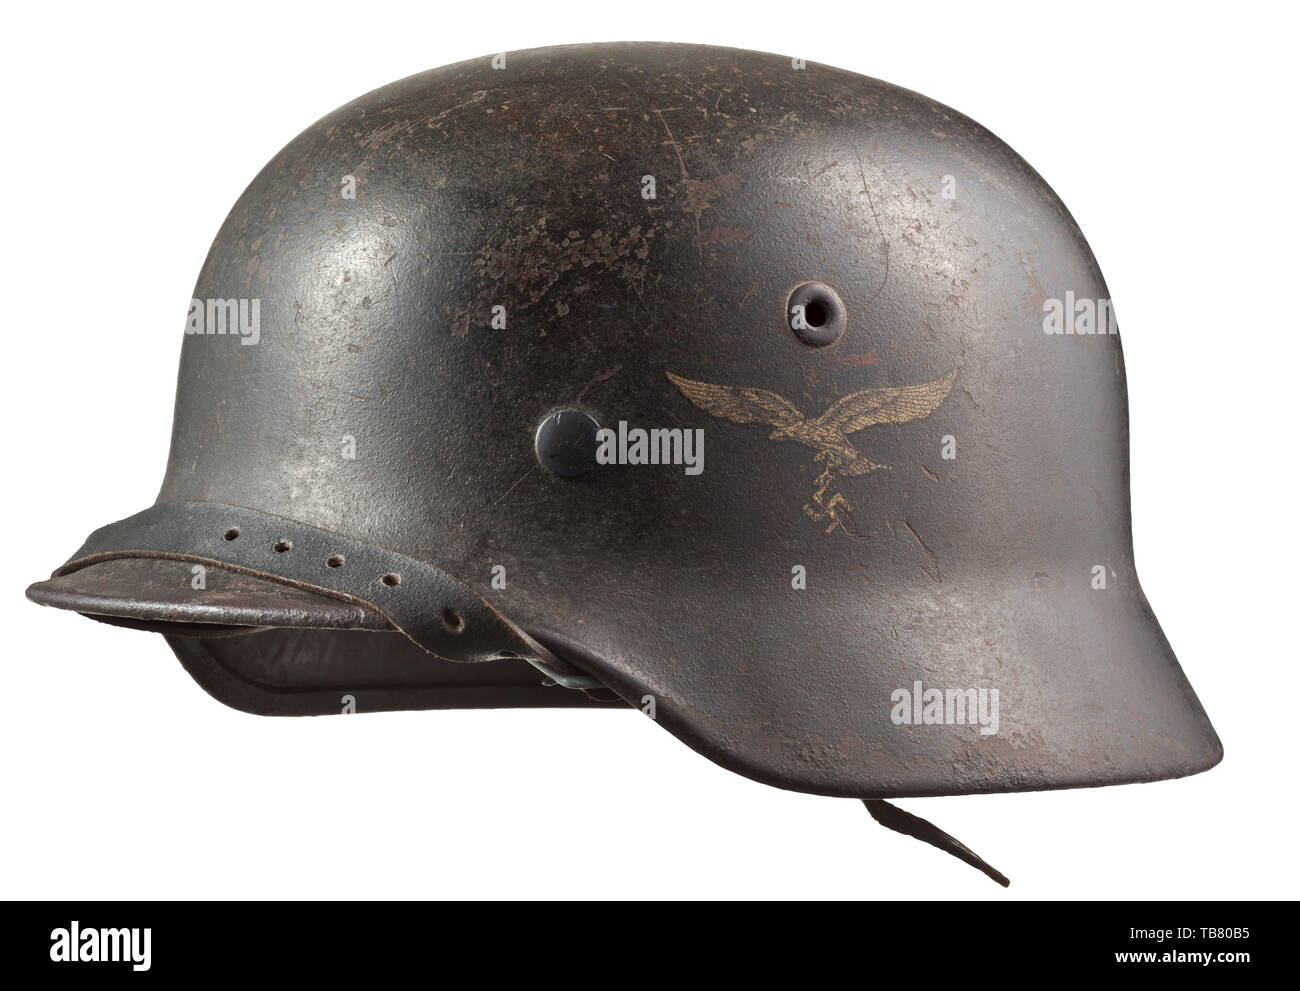 Body armour, helmets, German steel helmet M40, introduced 1940, Luftwaffe (Air Force) pattern, Editorial-Use-Only Stock Photo